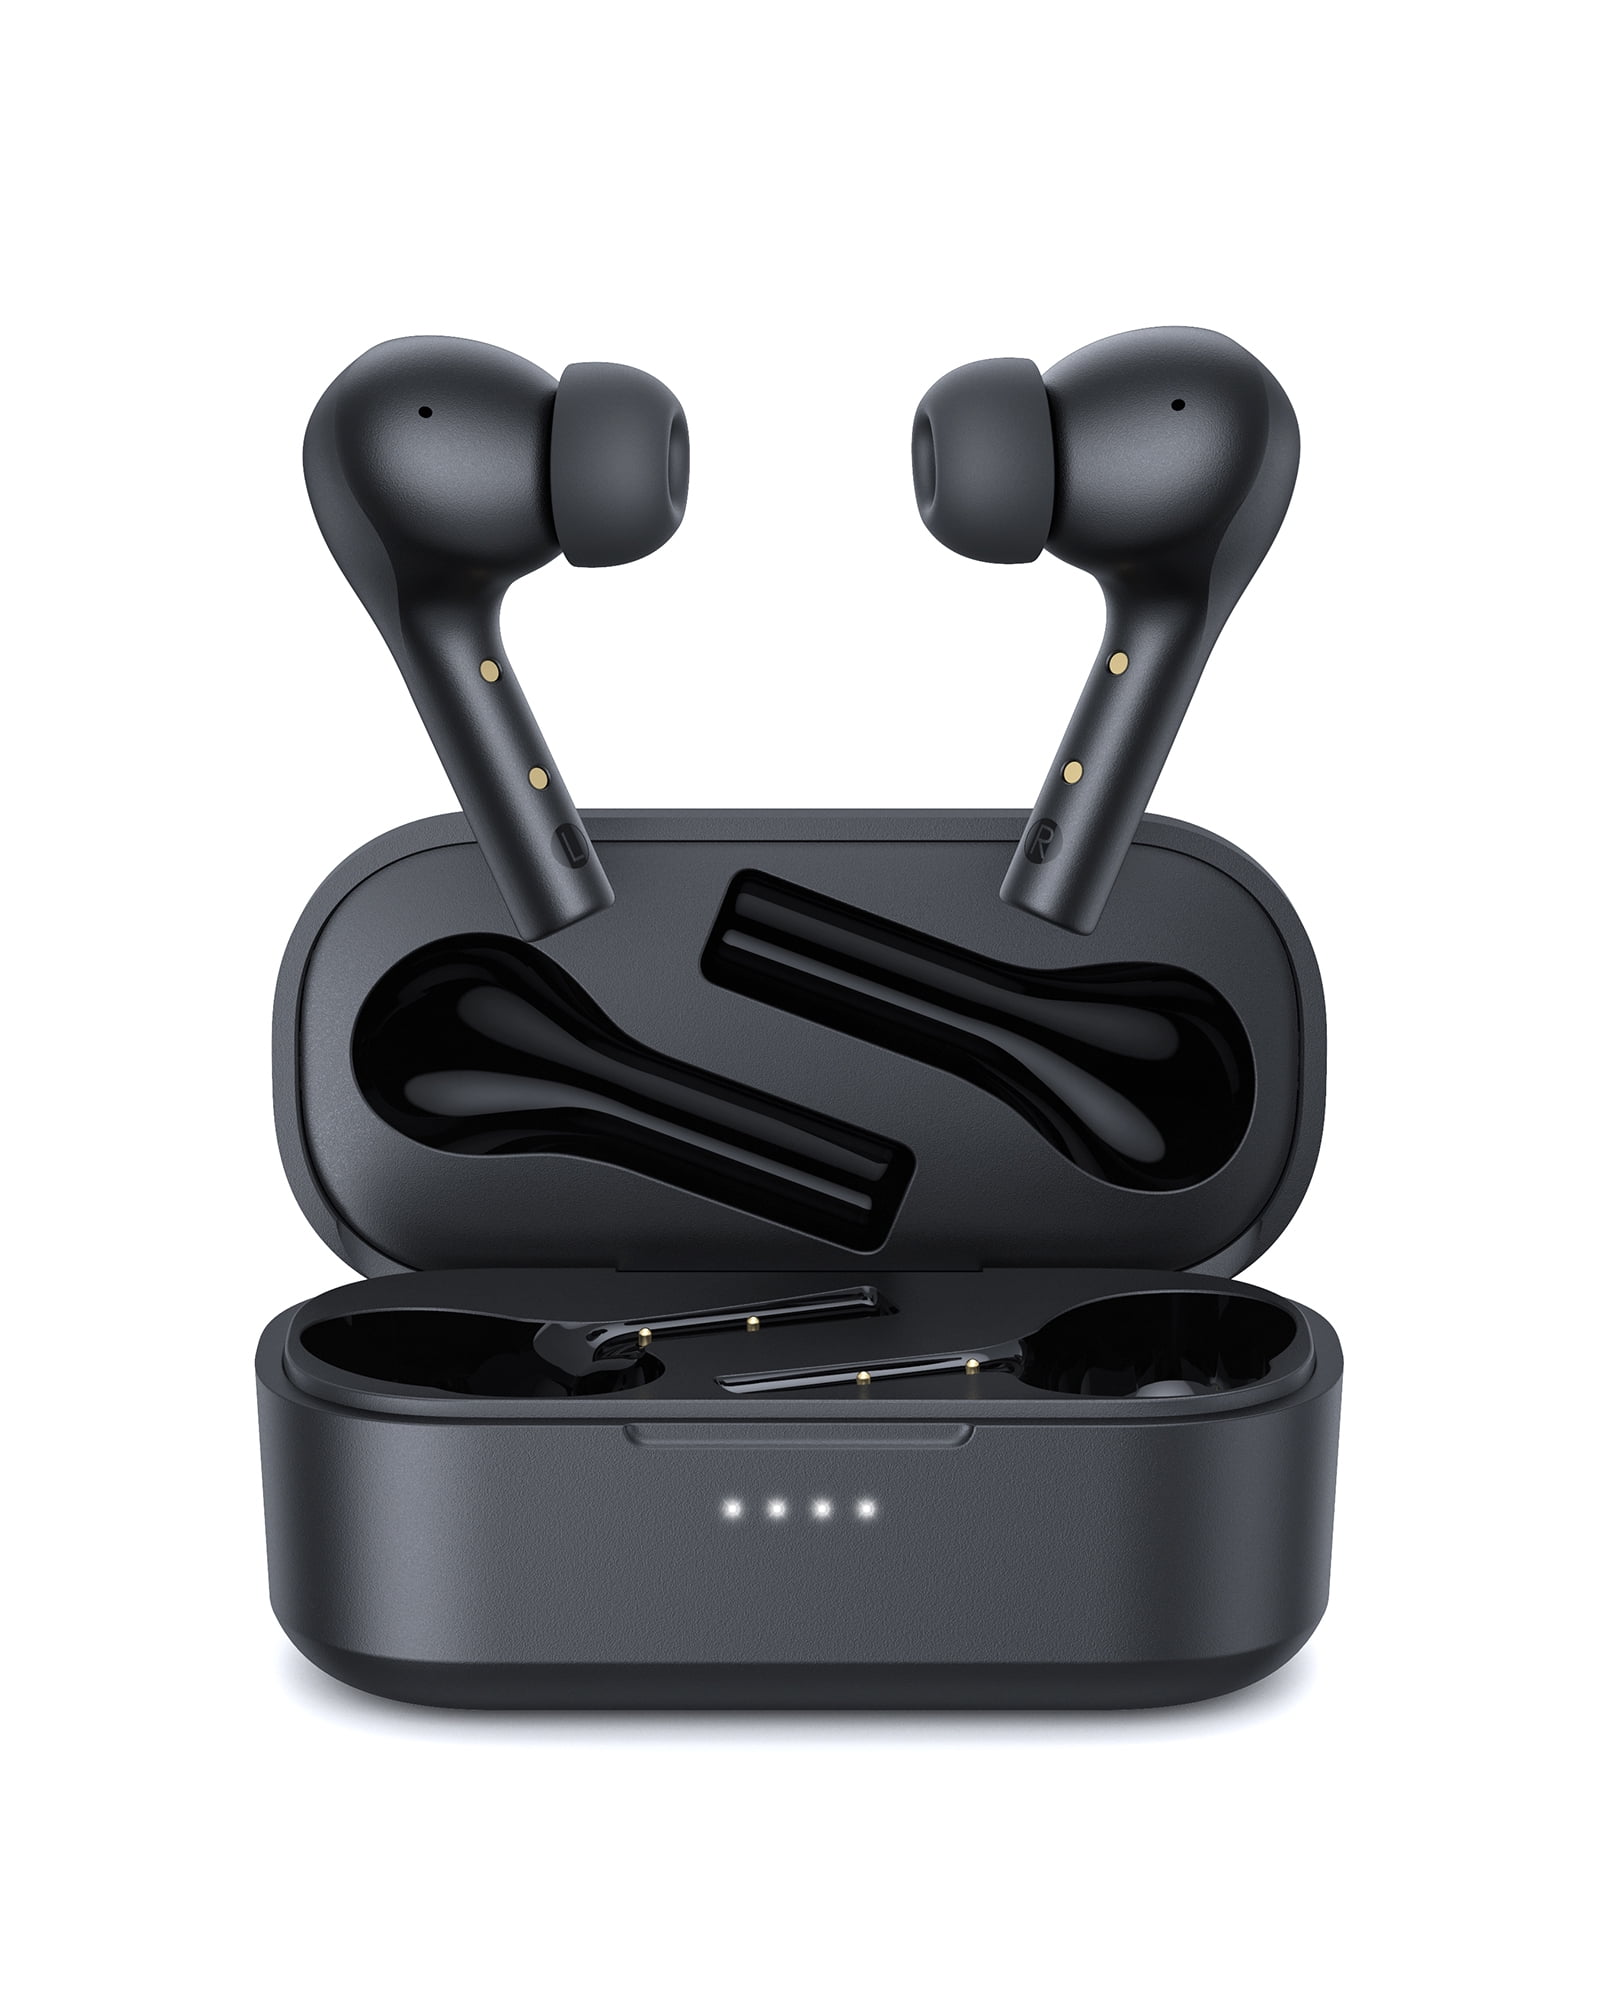 Wireless Earbuds,Bluetooth Earbuds Bluetooth 5.0 Stereo Earbuds IPX6 Waterproof Sport Wireless Headphones Touch Control Bluetooth Headphones 25 Hrs Play Time with Charging Case/Mics 